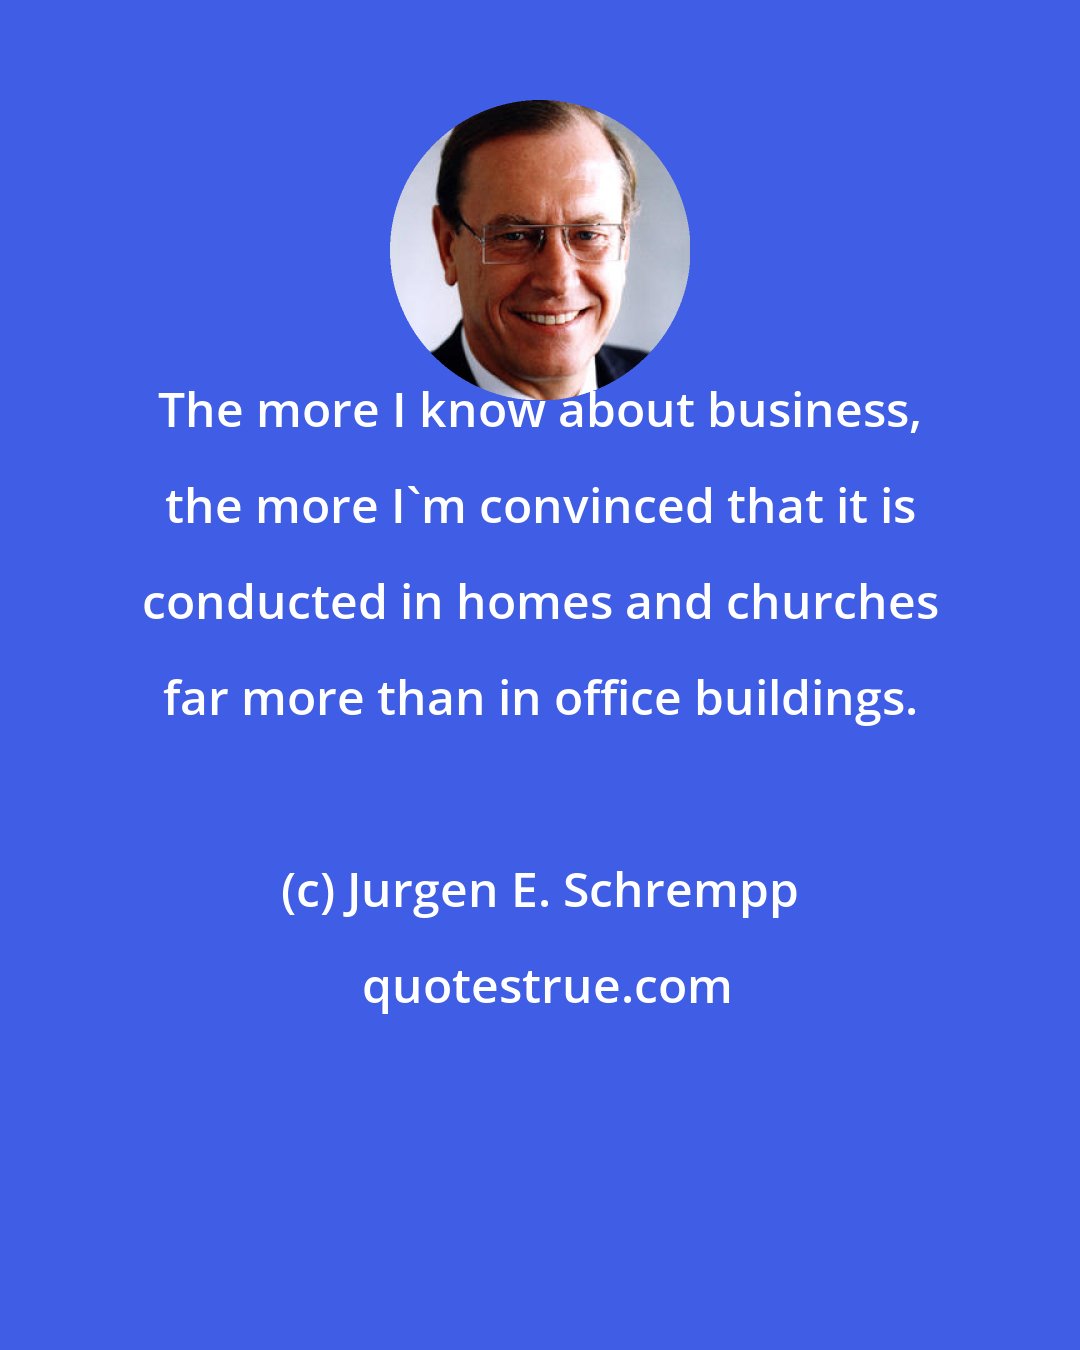 Jurgen E. Schrempp: The more I know about business, the more I'm convinced that it is conducted in homes and churches far more than in office buildings.